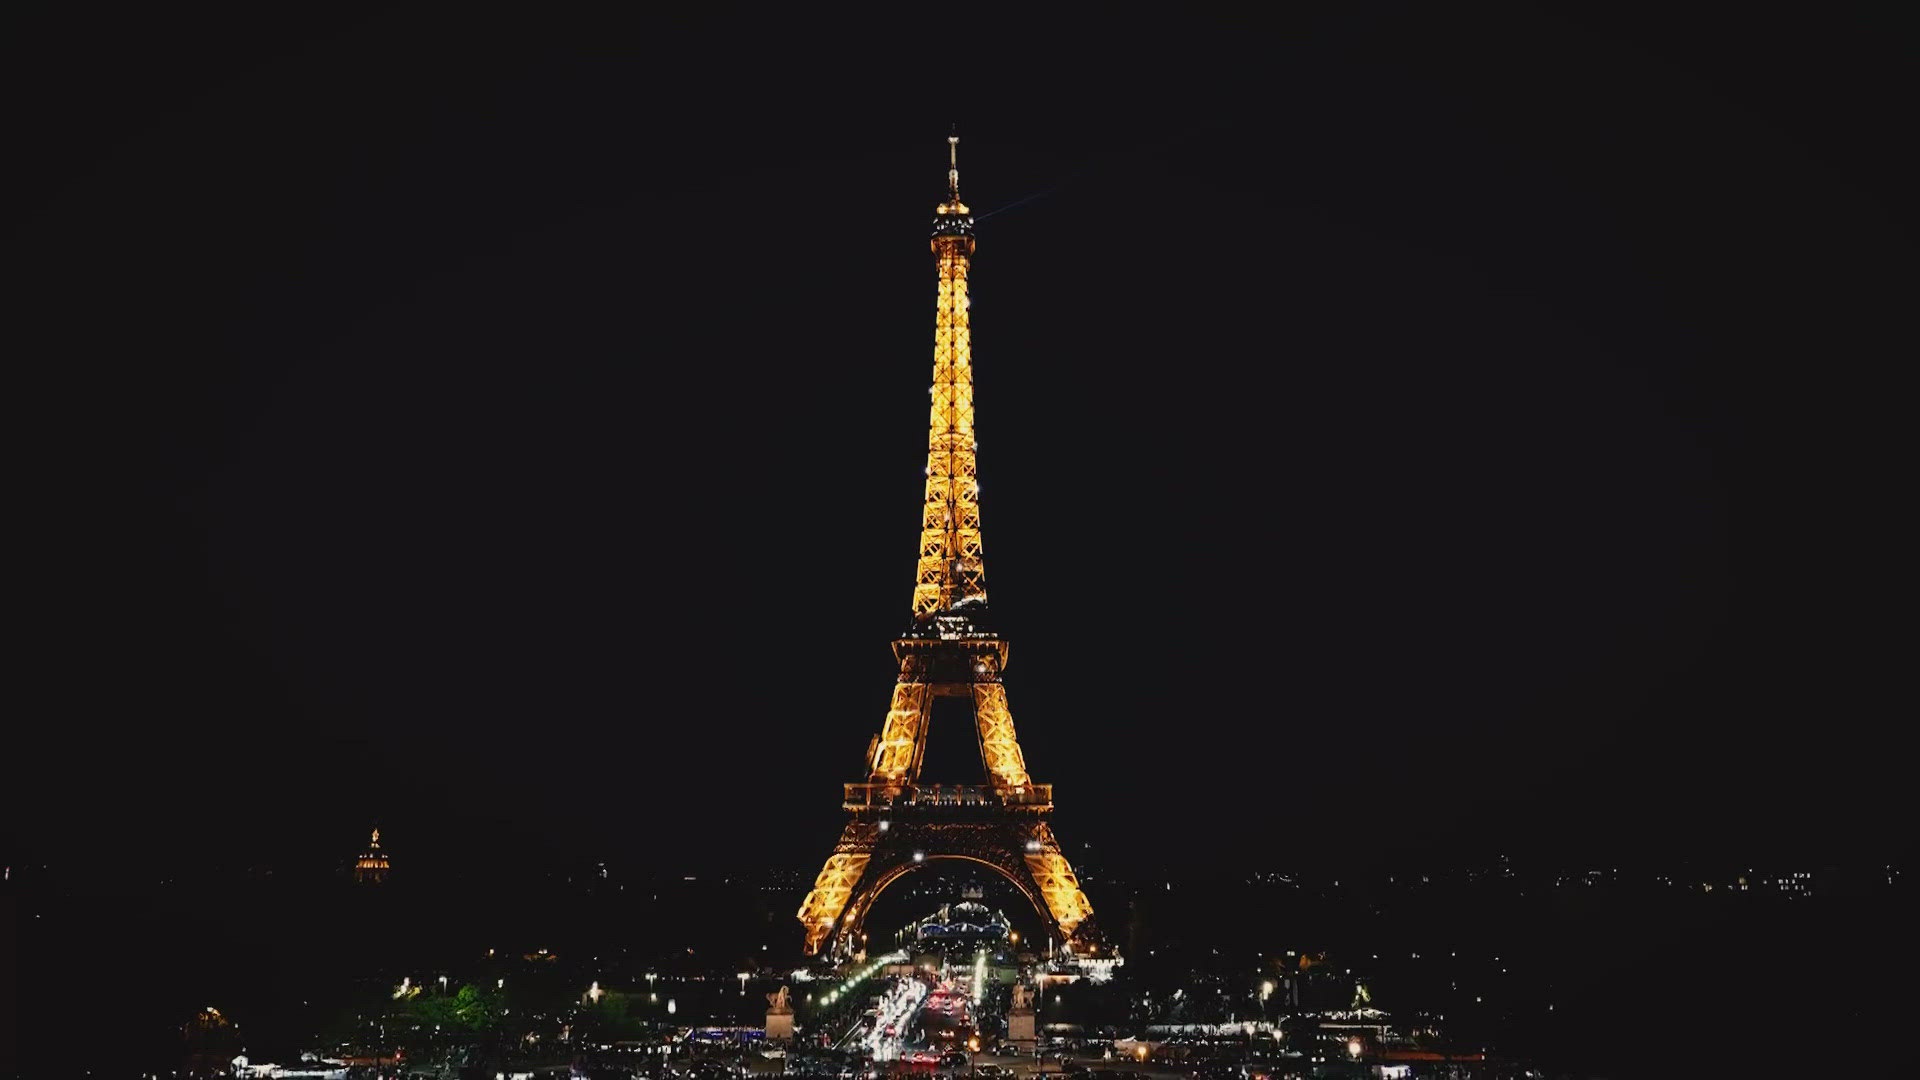 The Eiffel Tower stands above all the rest as a symbol of Paris.